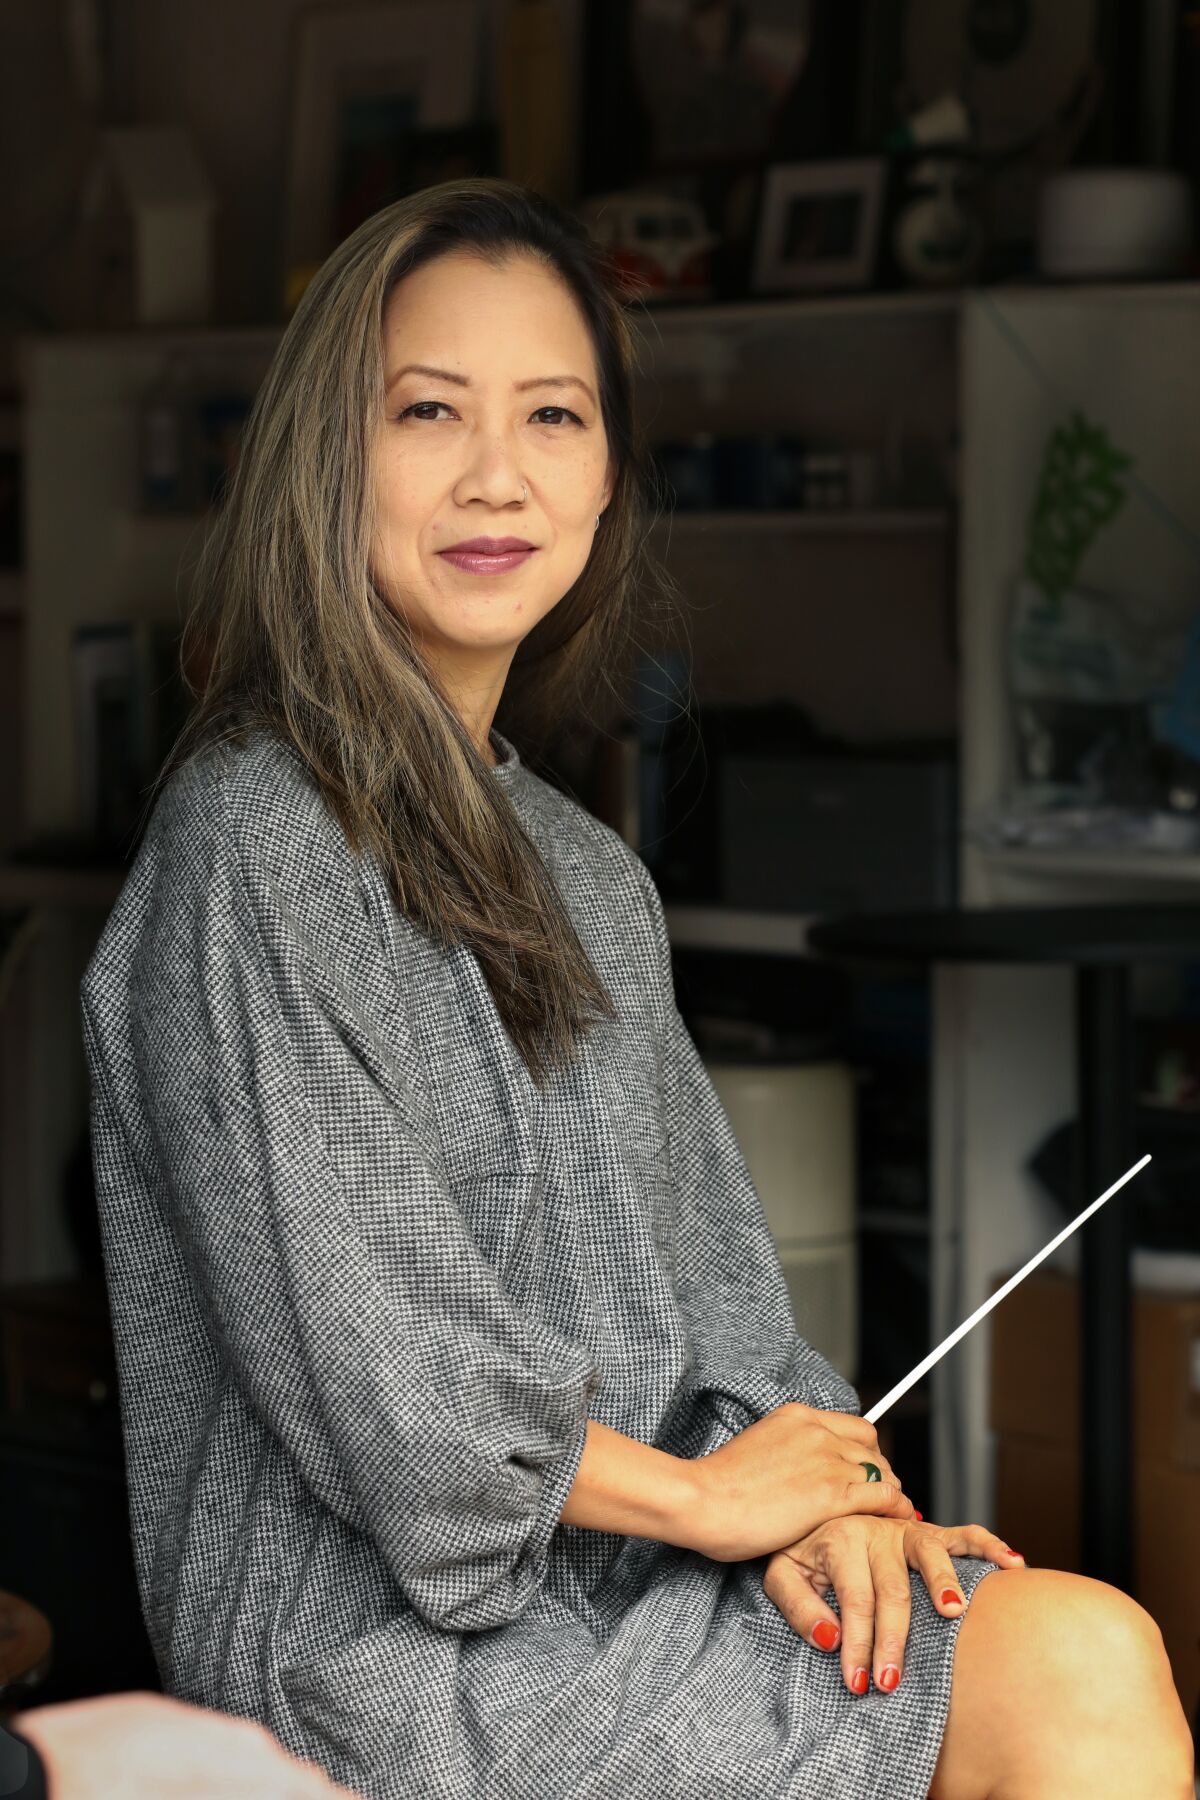 A woman holds a conductor's baton and poses for a photo.